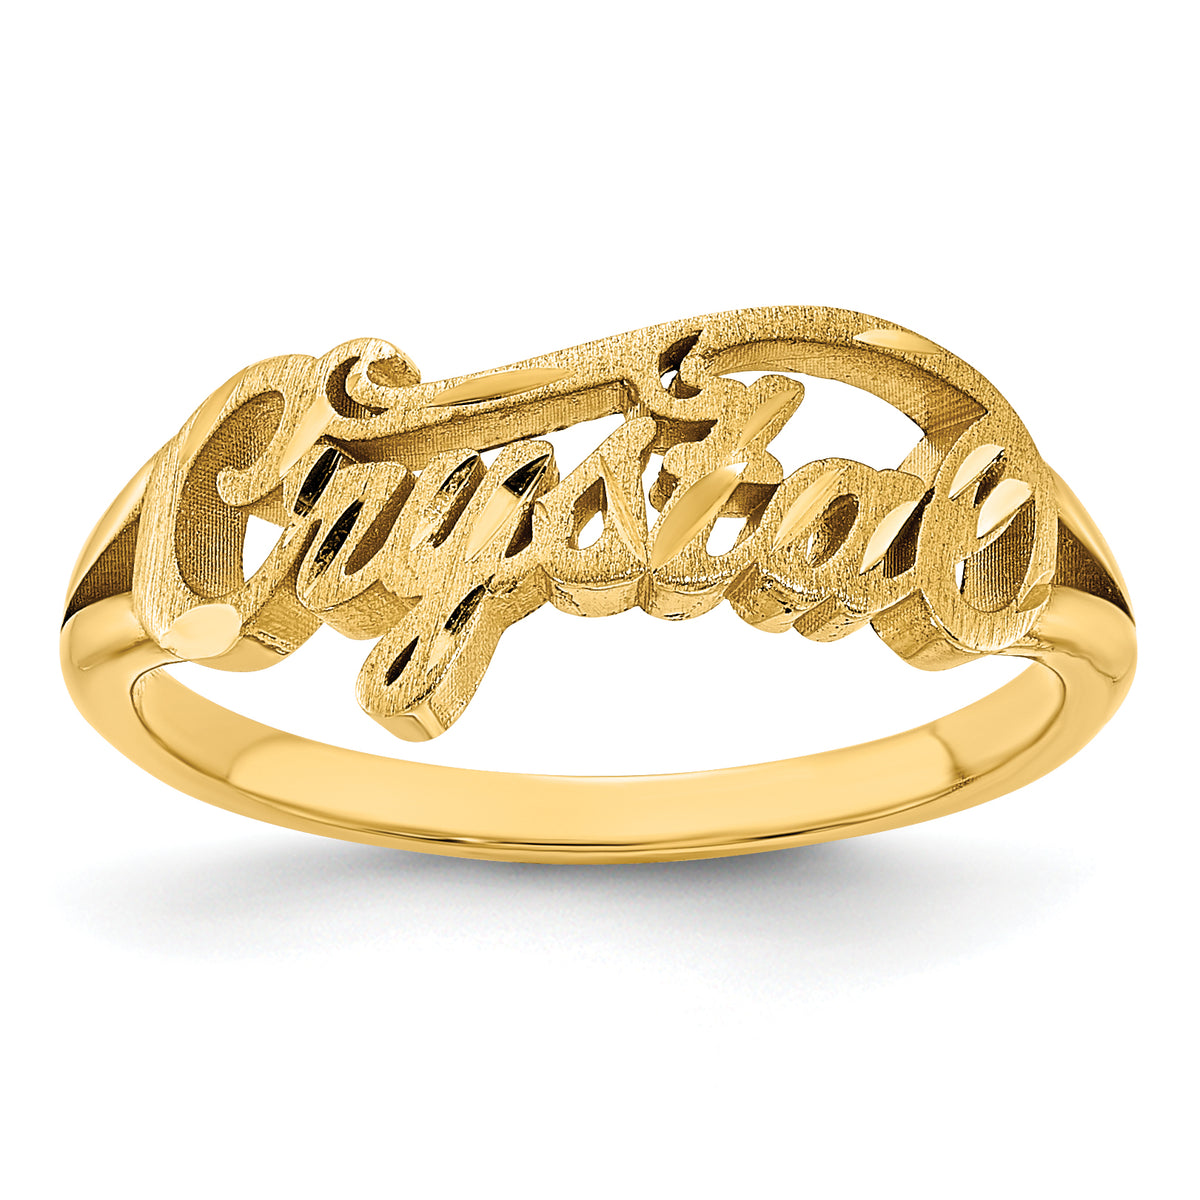 Cursive Name Ring - Available in Gold Plated, Sterling Silver, Rose Gold Plated) Casted High Polish Name Ring, Size 5 to 9